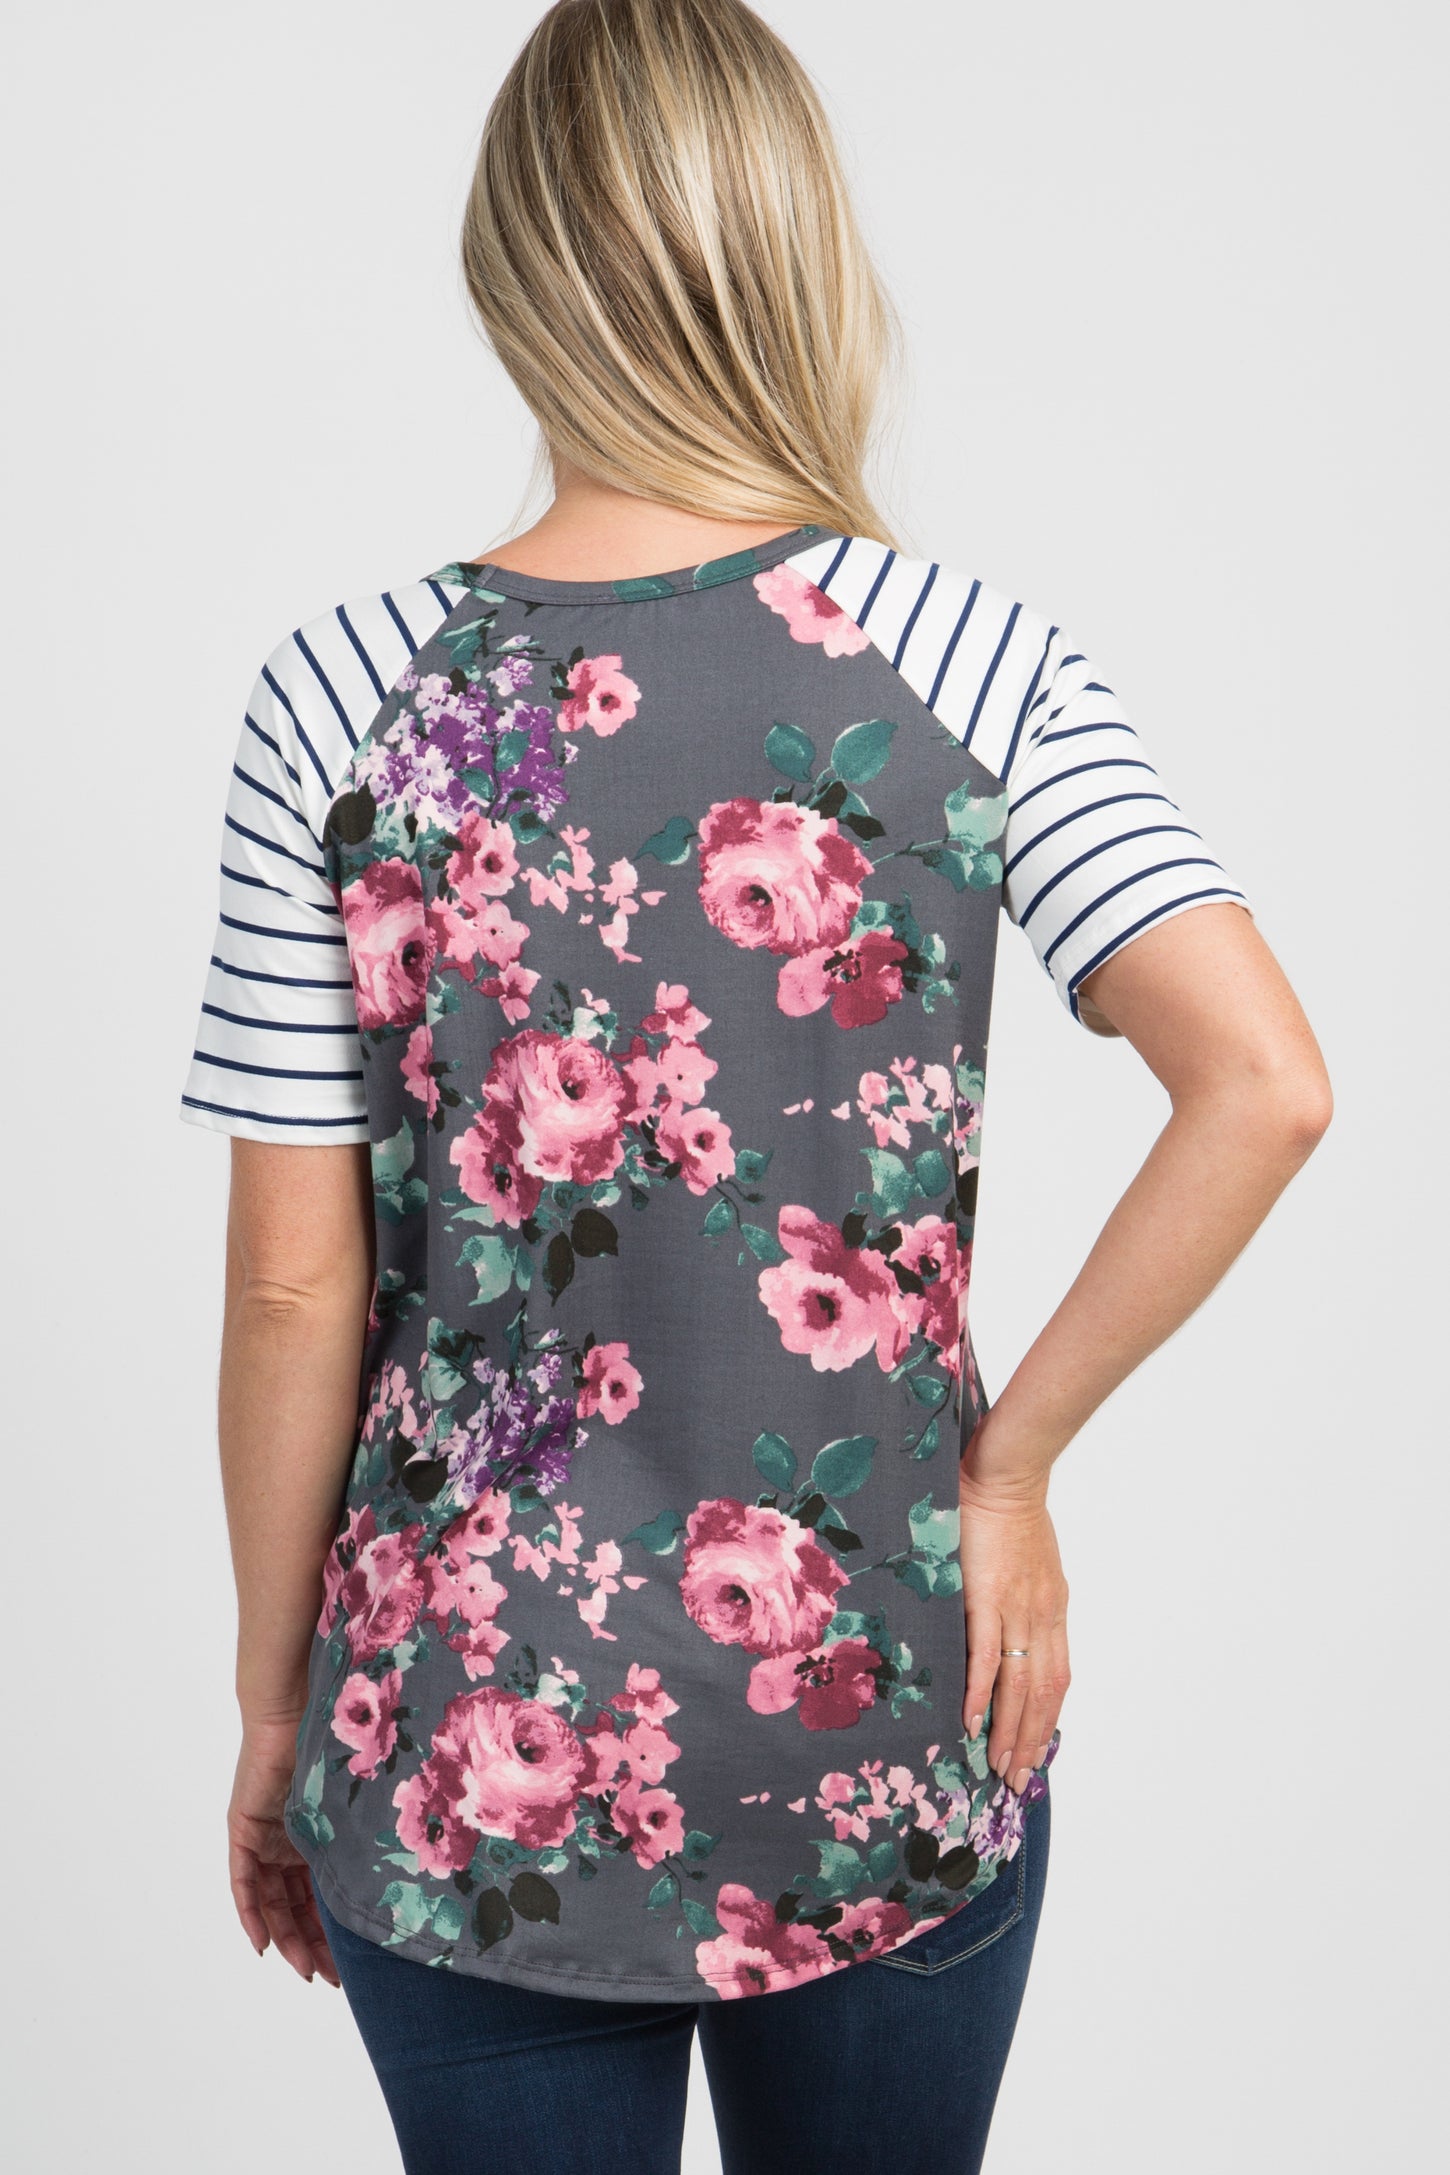 Charcoal Floral Colorblock Striped Maternity Top